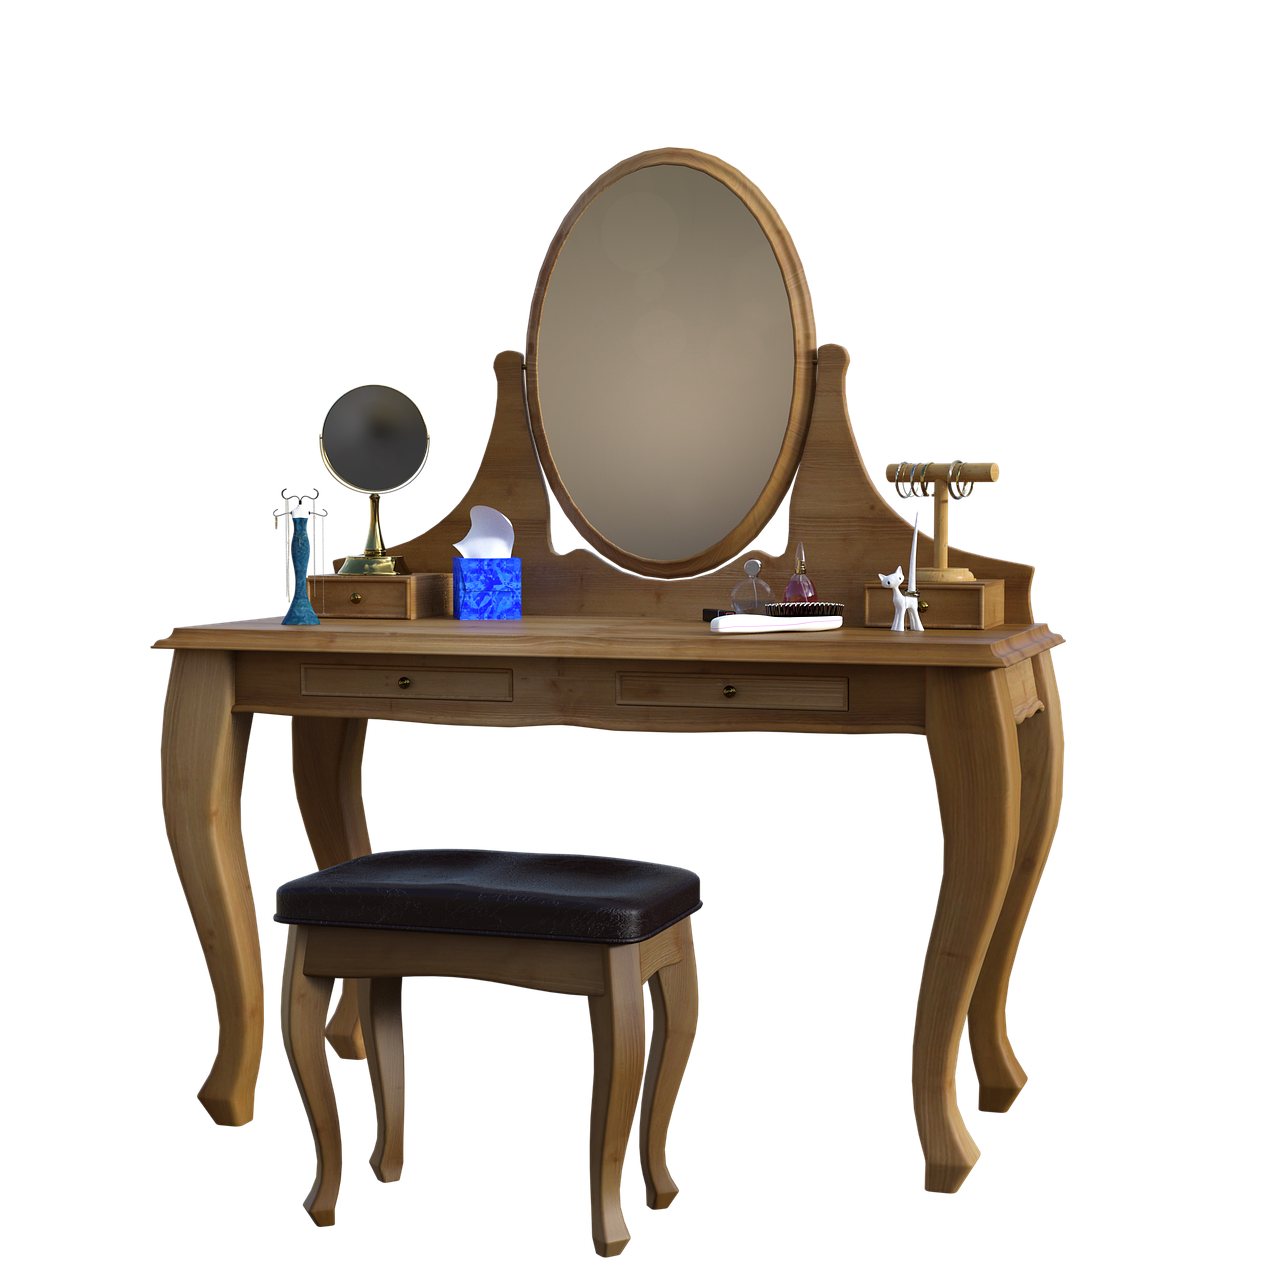 Dressing Table or Vanity: A Personal Space - Choosing the Right Pieces for Your Bedroom